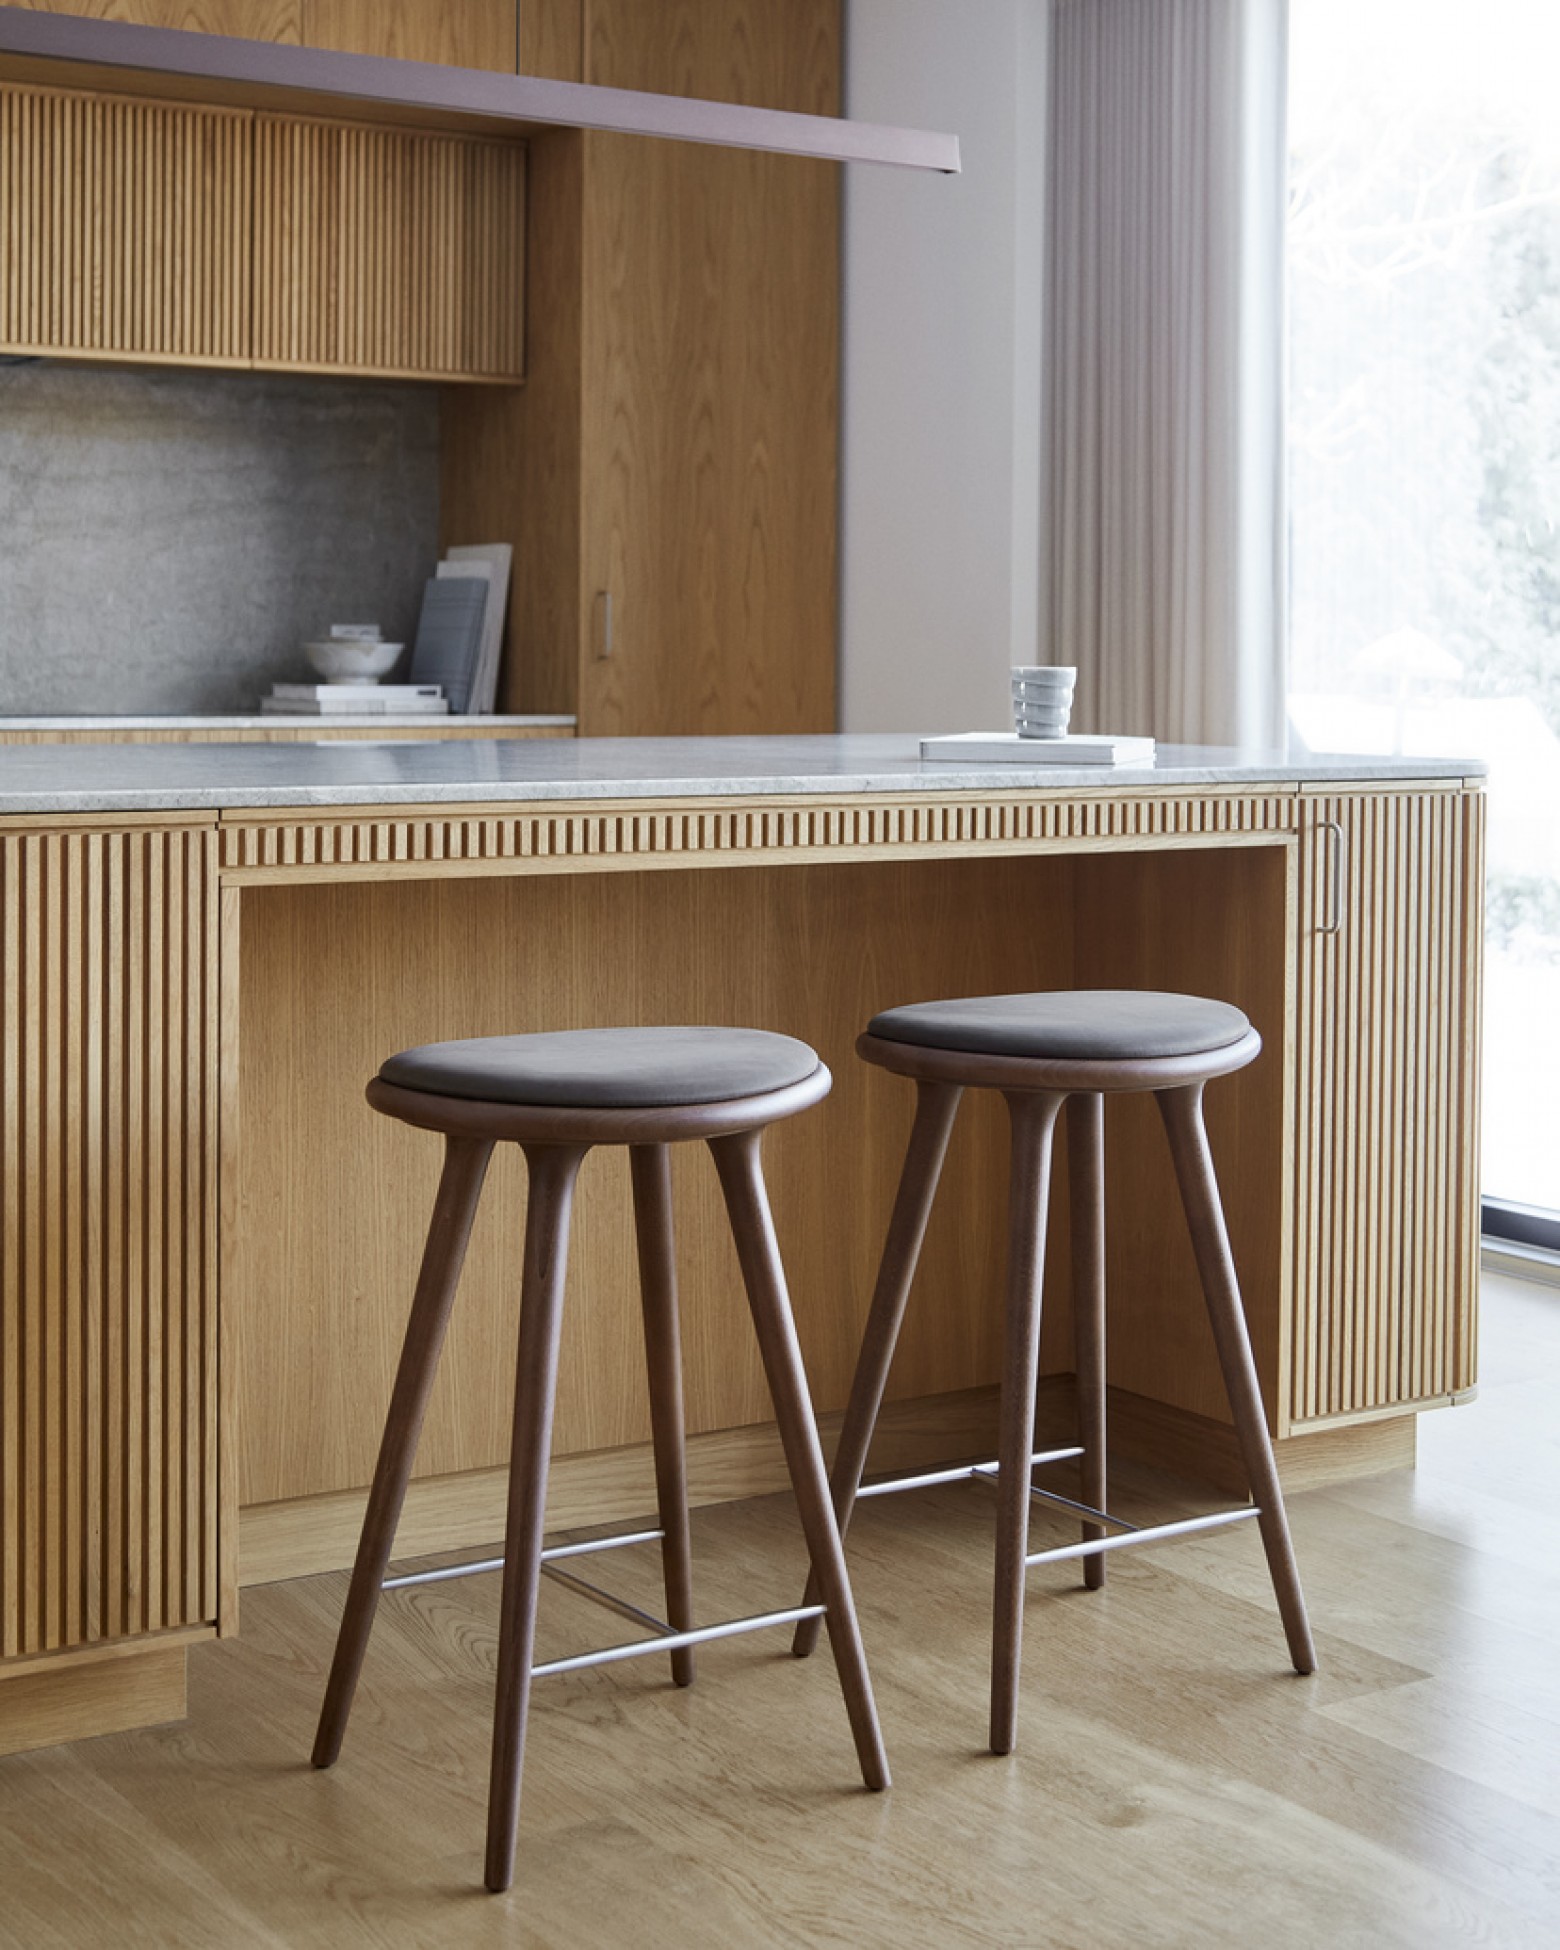 TOP LANCERING: Mater High Stool LIMITED: 595 Euro excl. BTW  Victors Design Agency